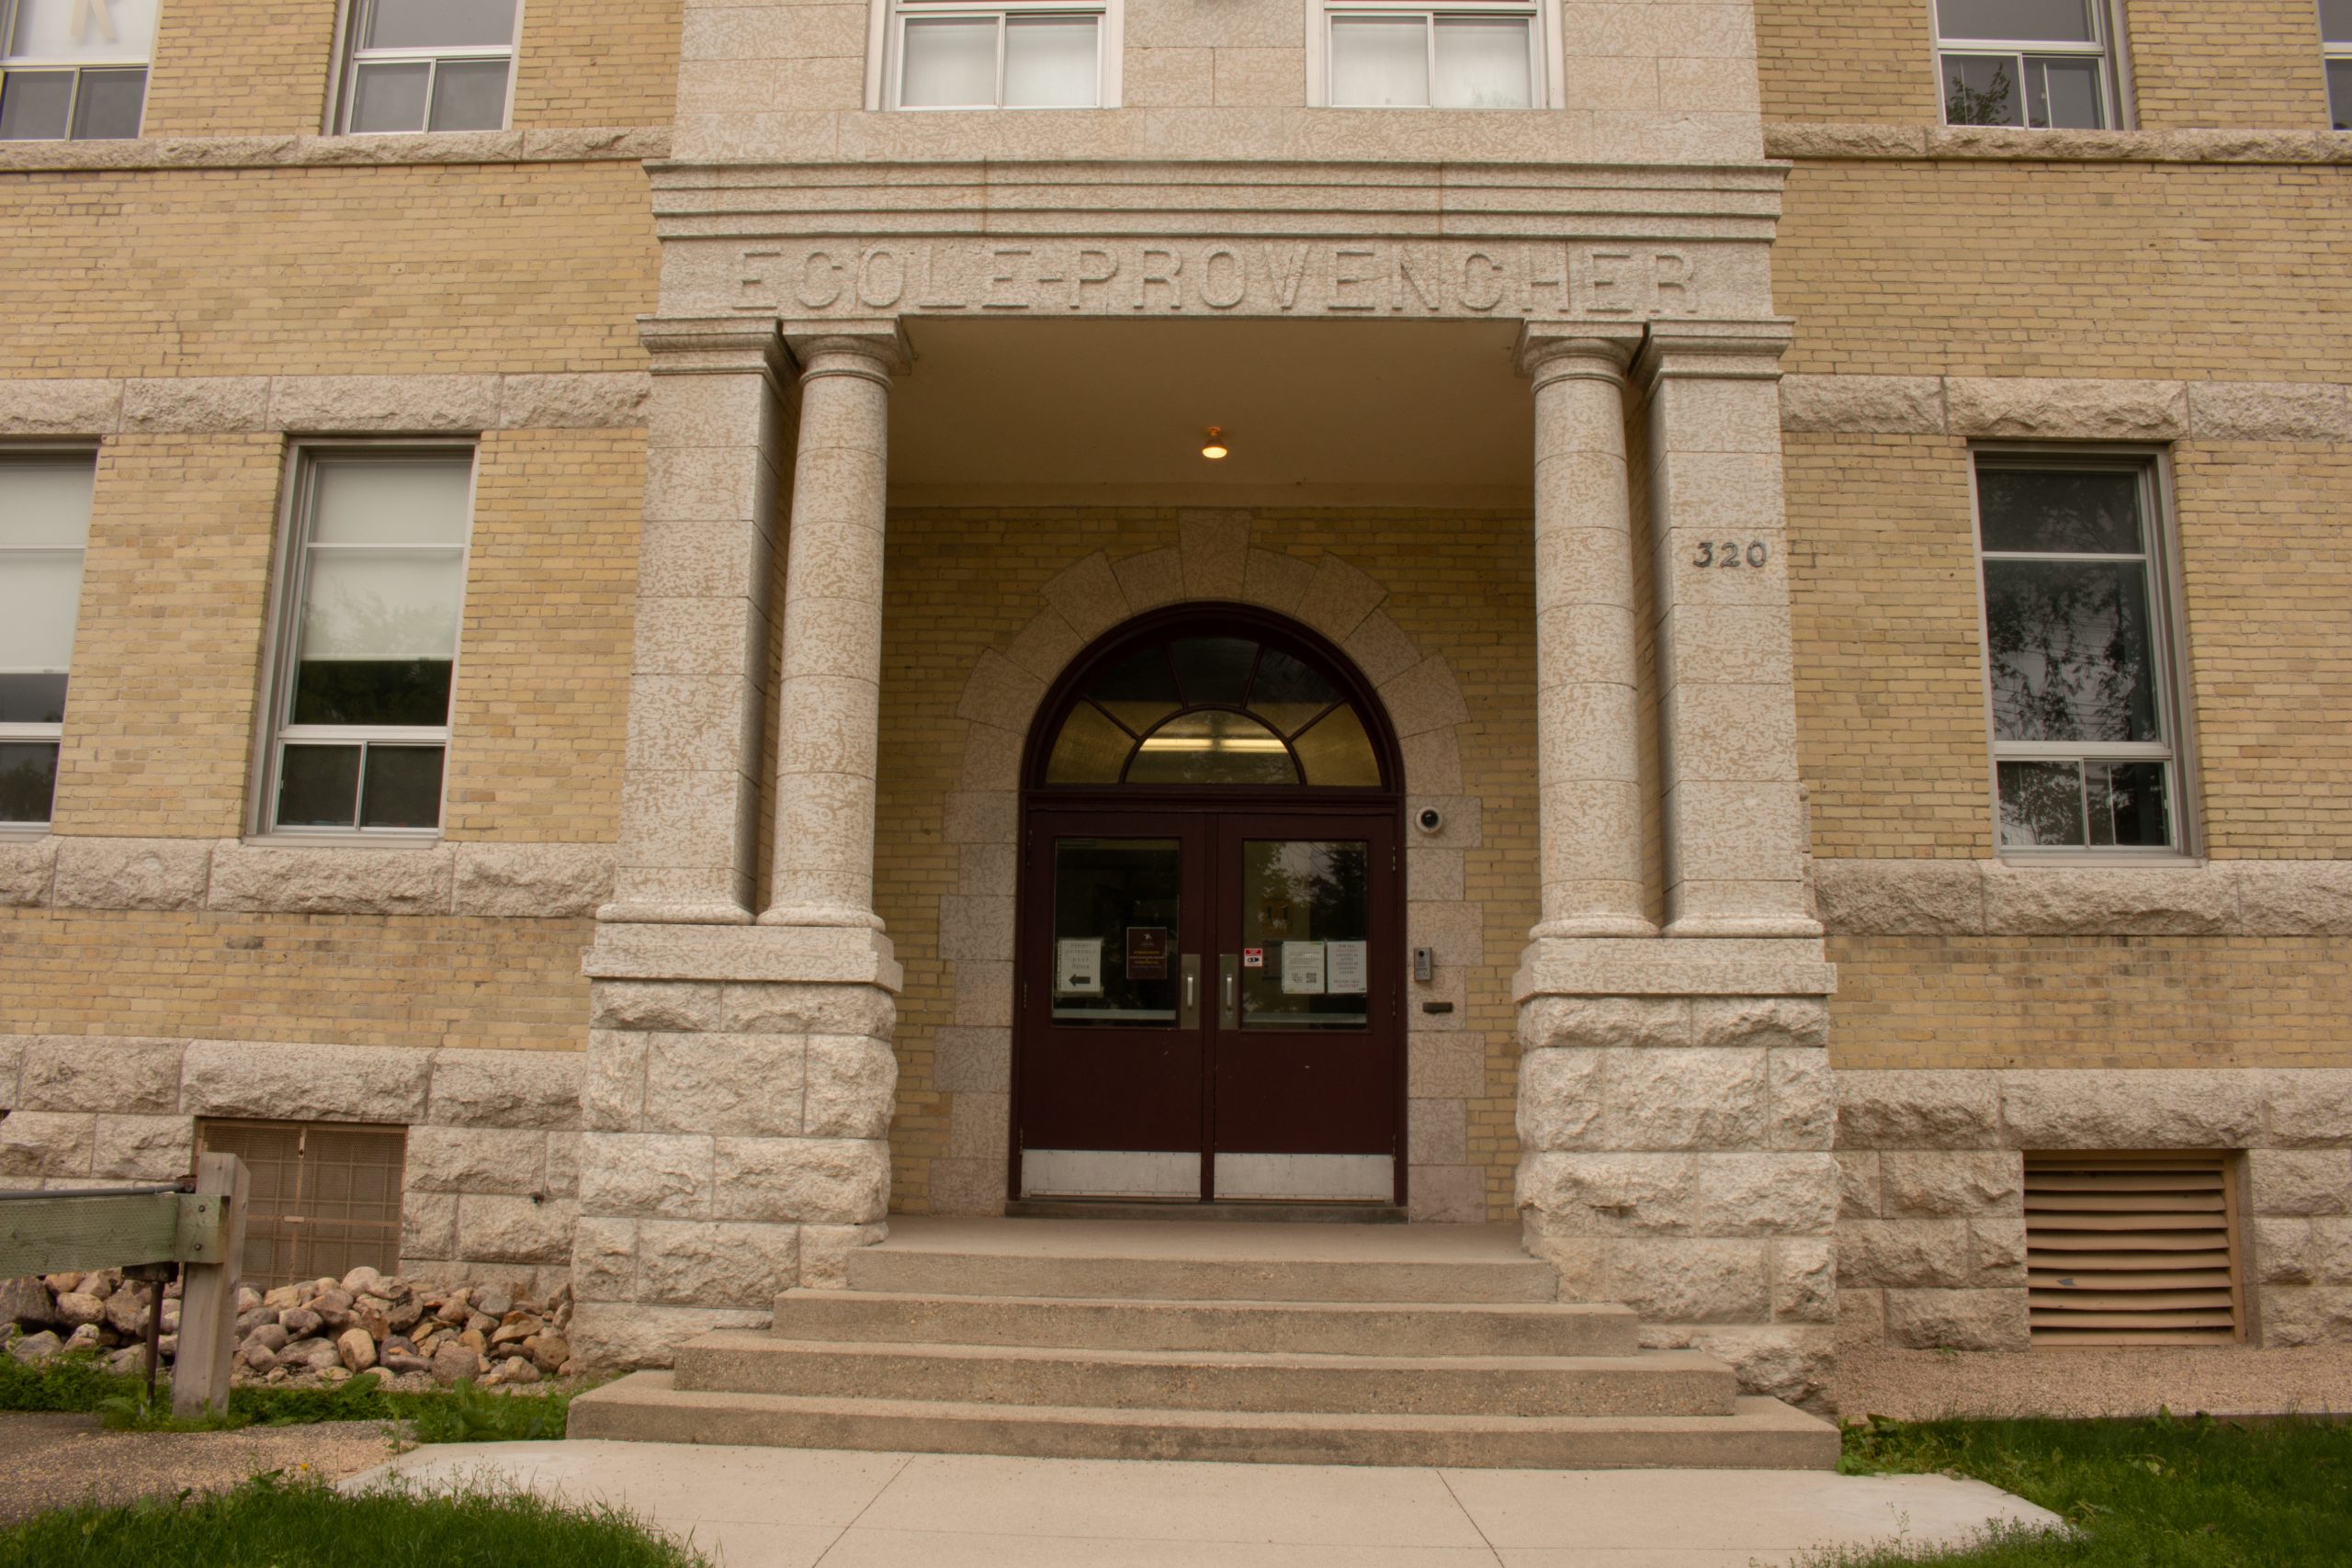 Detail photo of front entry to Ecole Provencher at 320 Avenue de la Cathedrale